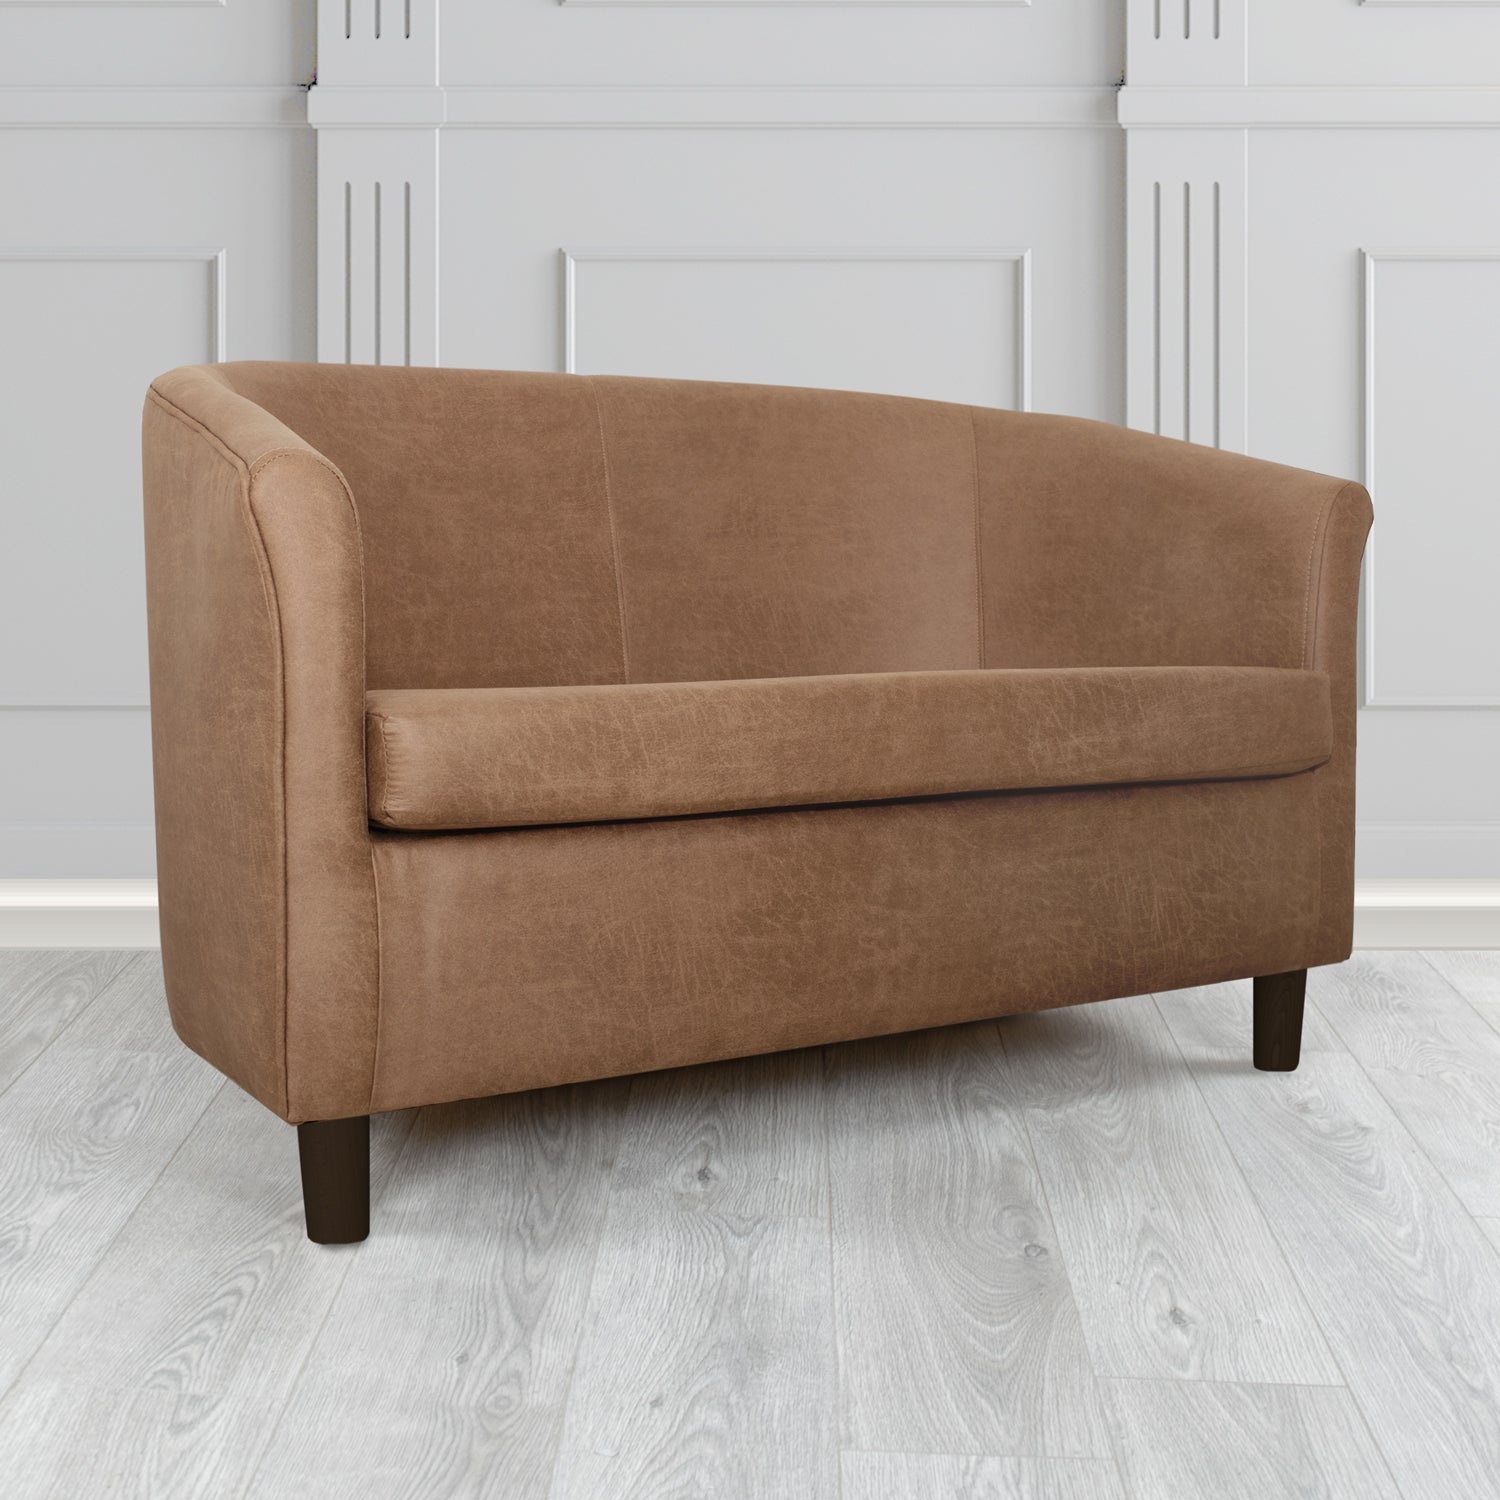 Tuscany 2 Seater Tub Sofa in Nevada Tan Faux Leather - The Tub Chair Shop